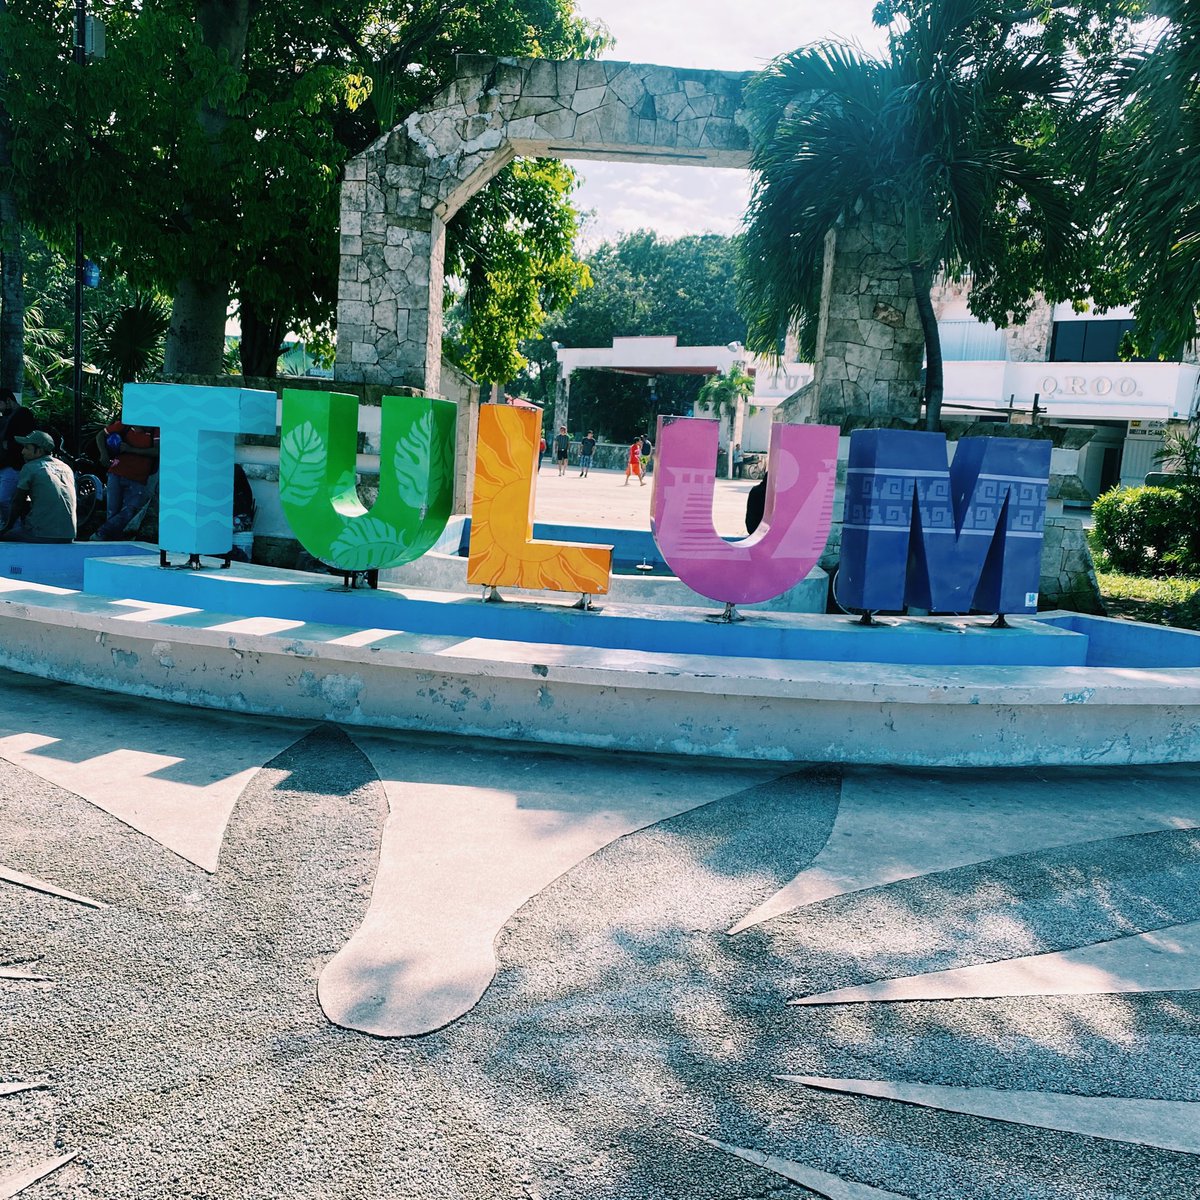 I went to  #Tulum and had a ball. Here’s the thread of my recommendations of places to book, things to eat, and where to stay/go.